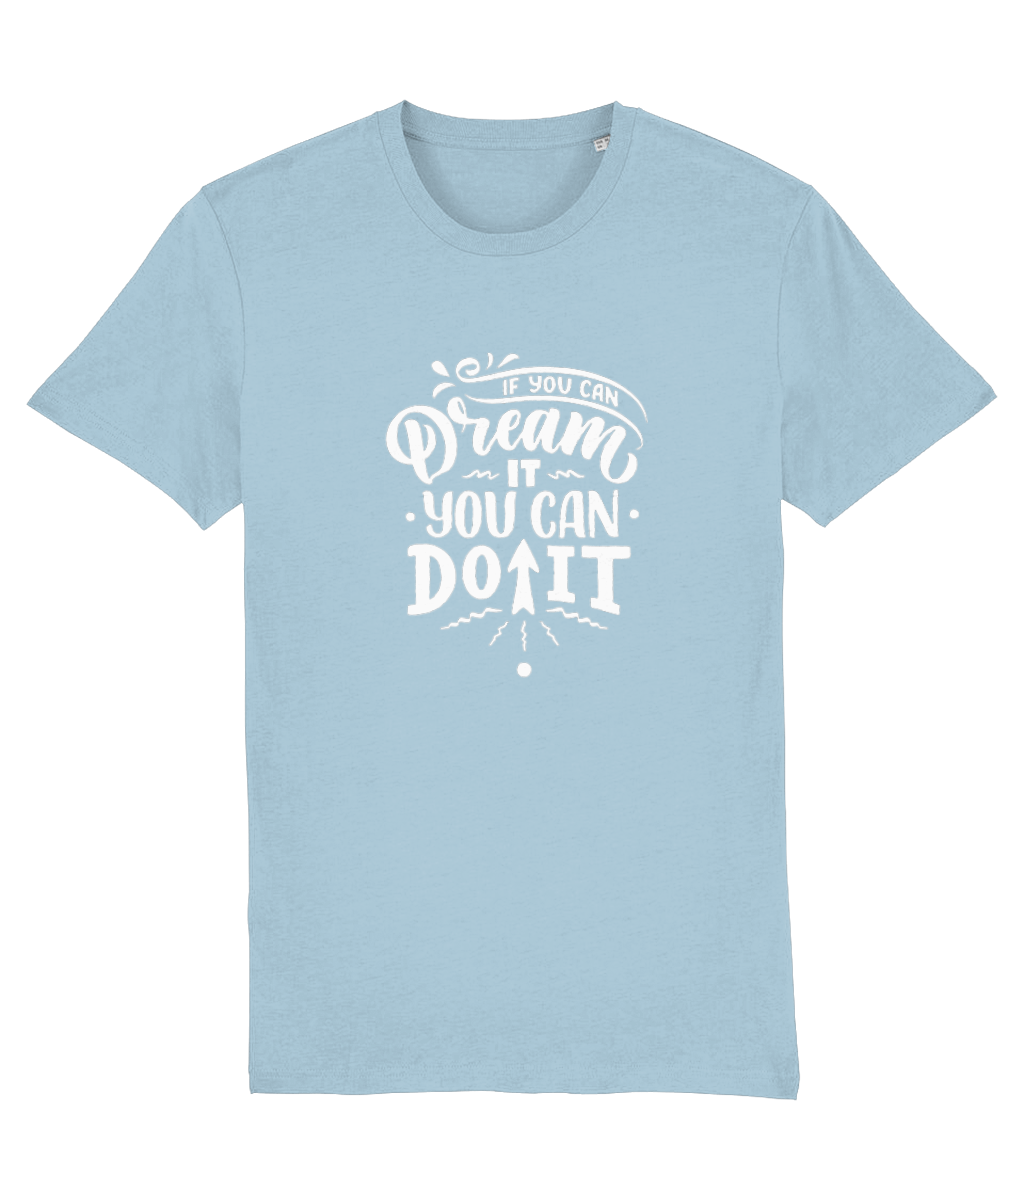 If You Can Dream It You Can Do It - T-shirt